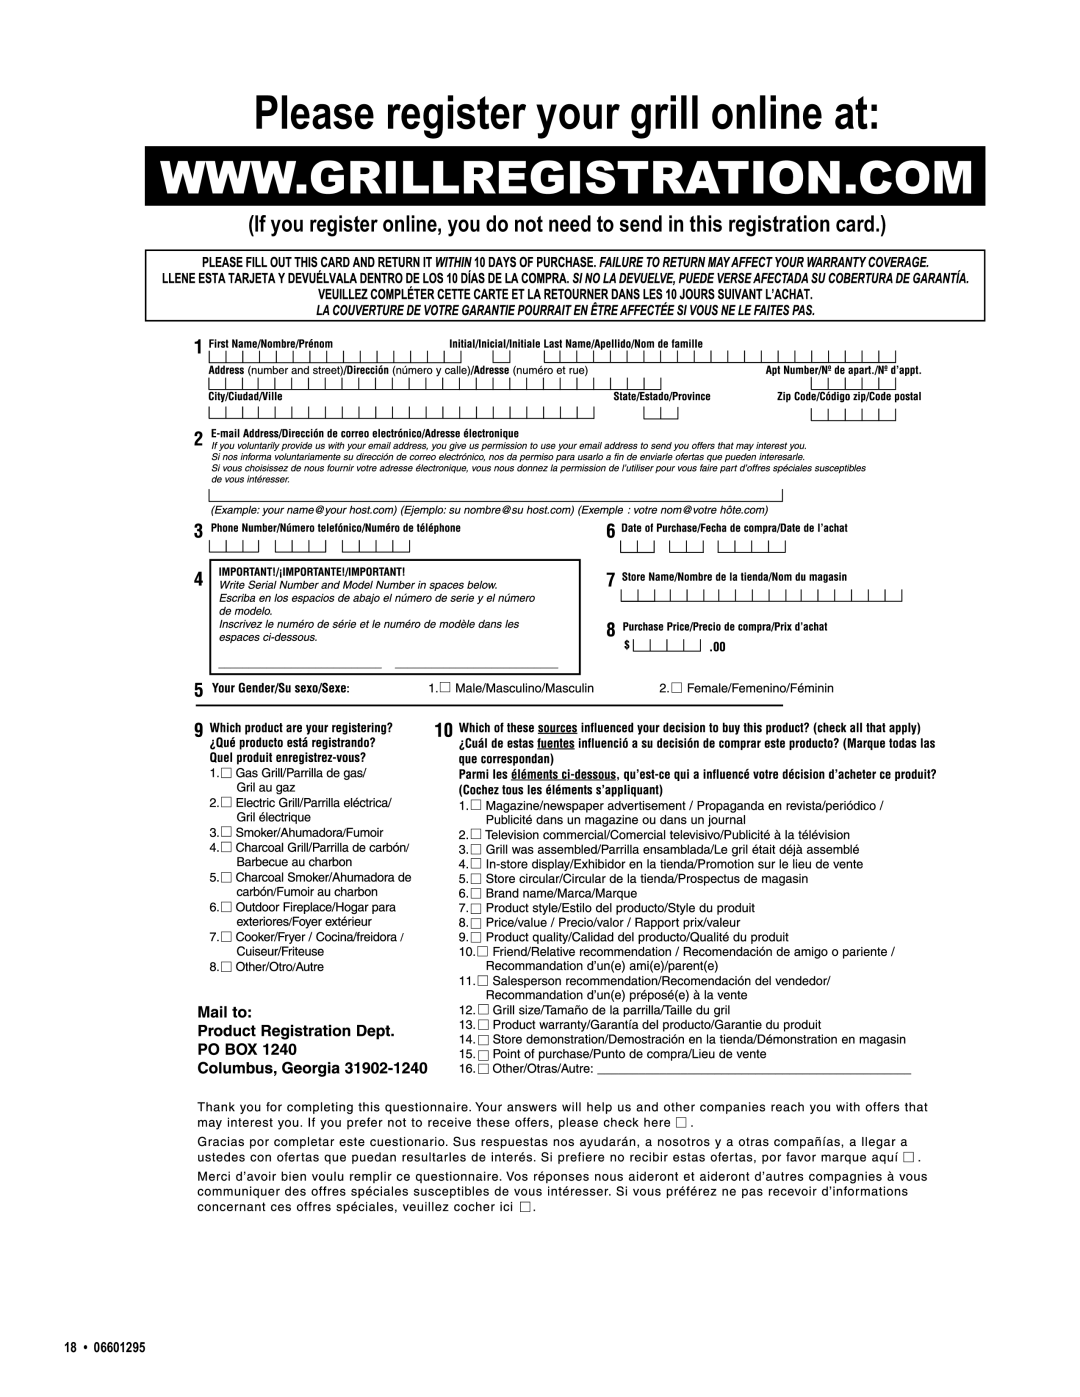 Char-Broil 06601295 manual Please register your grill online at 